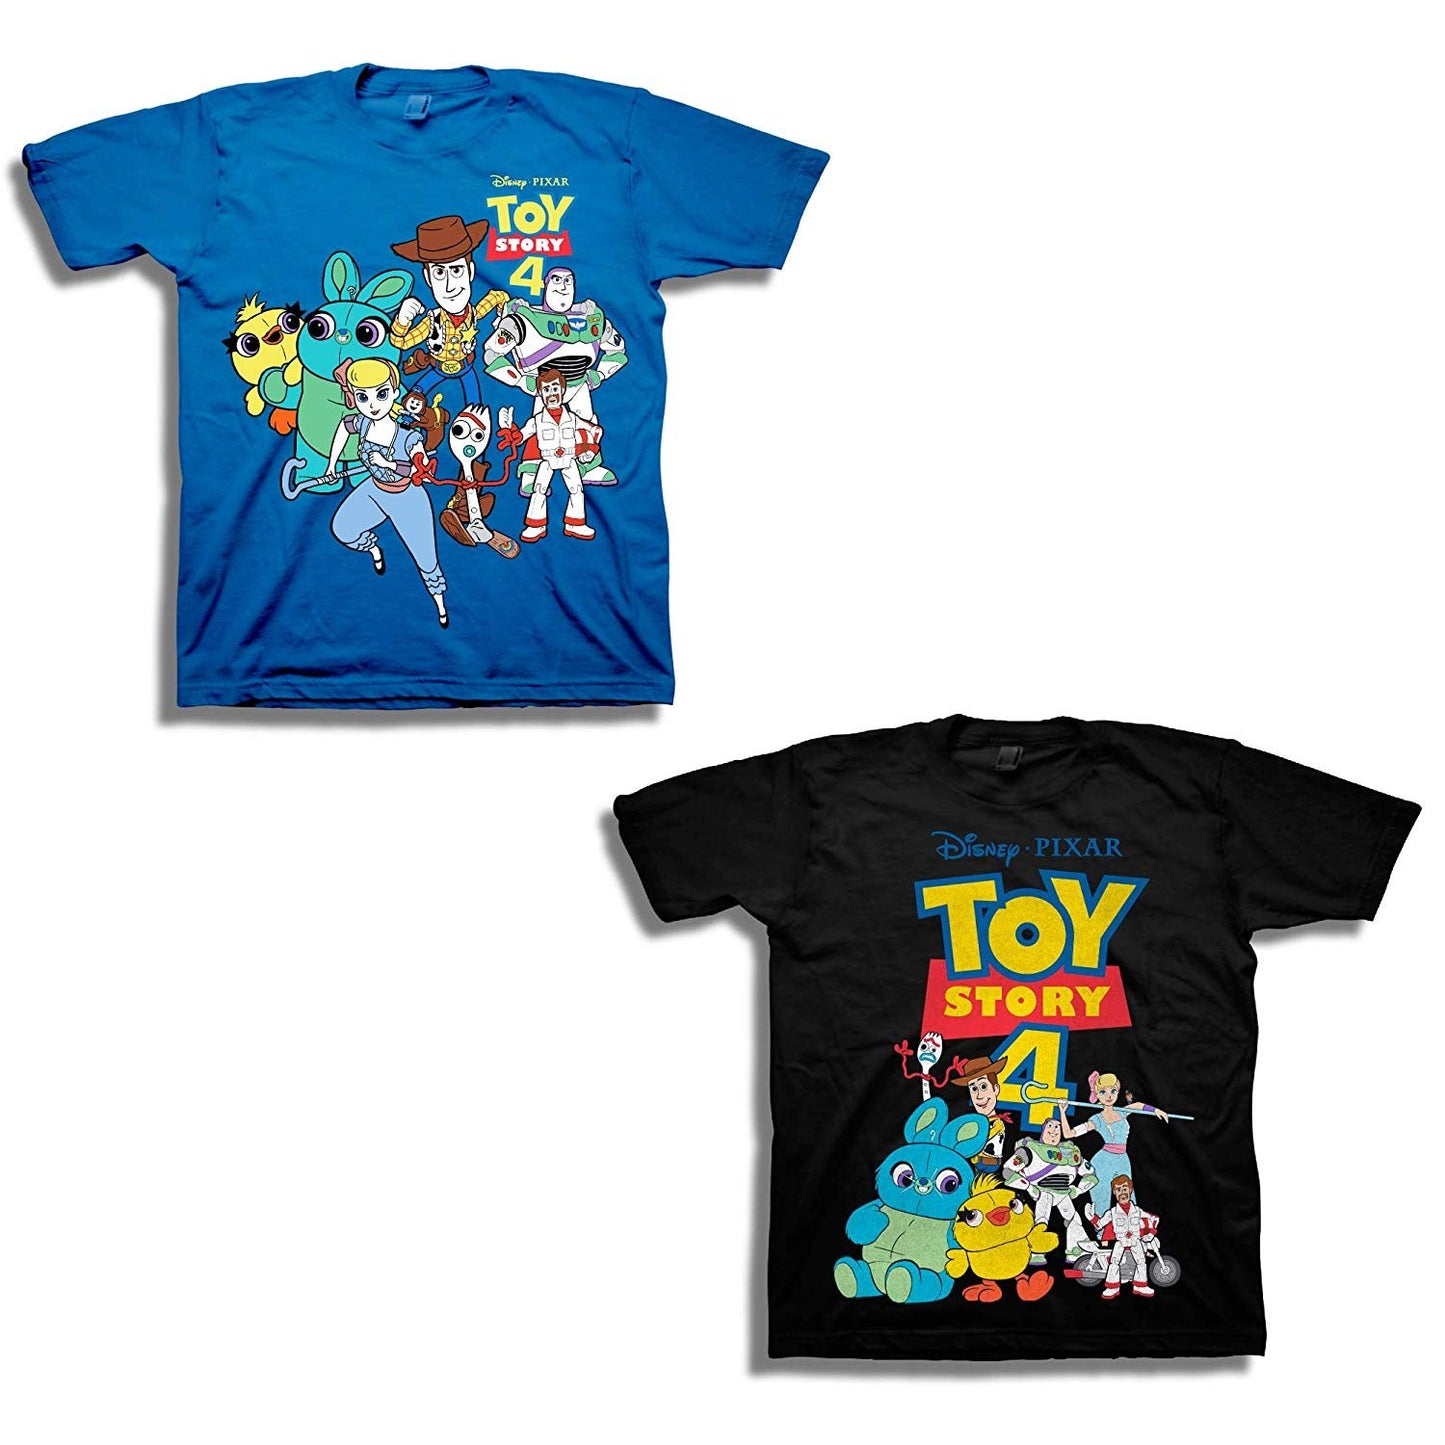 Toy Story Disney's Pixar Shirt - 2 Pack of Toy Story Tees -Buzz Lightyear,Sheriff Woody